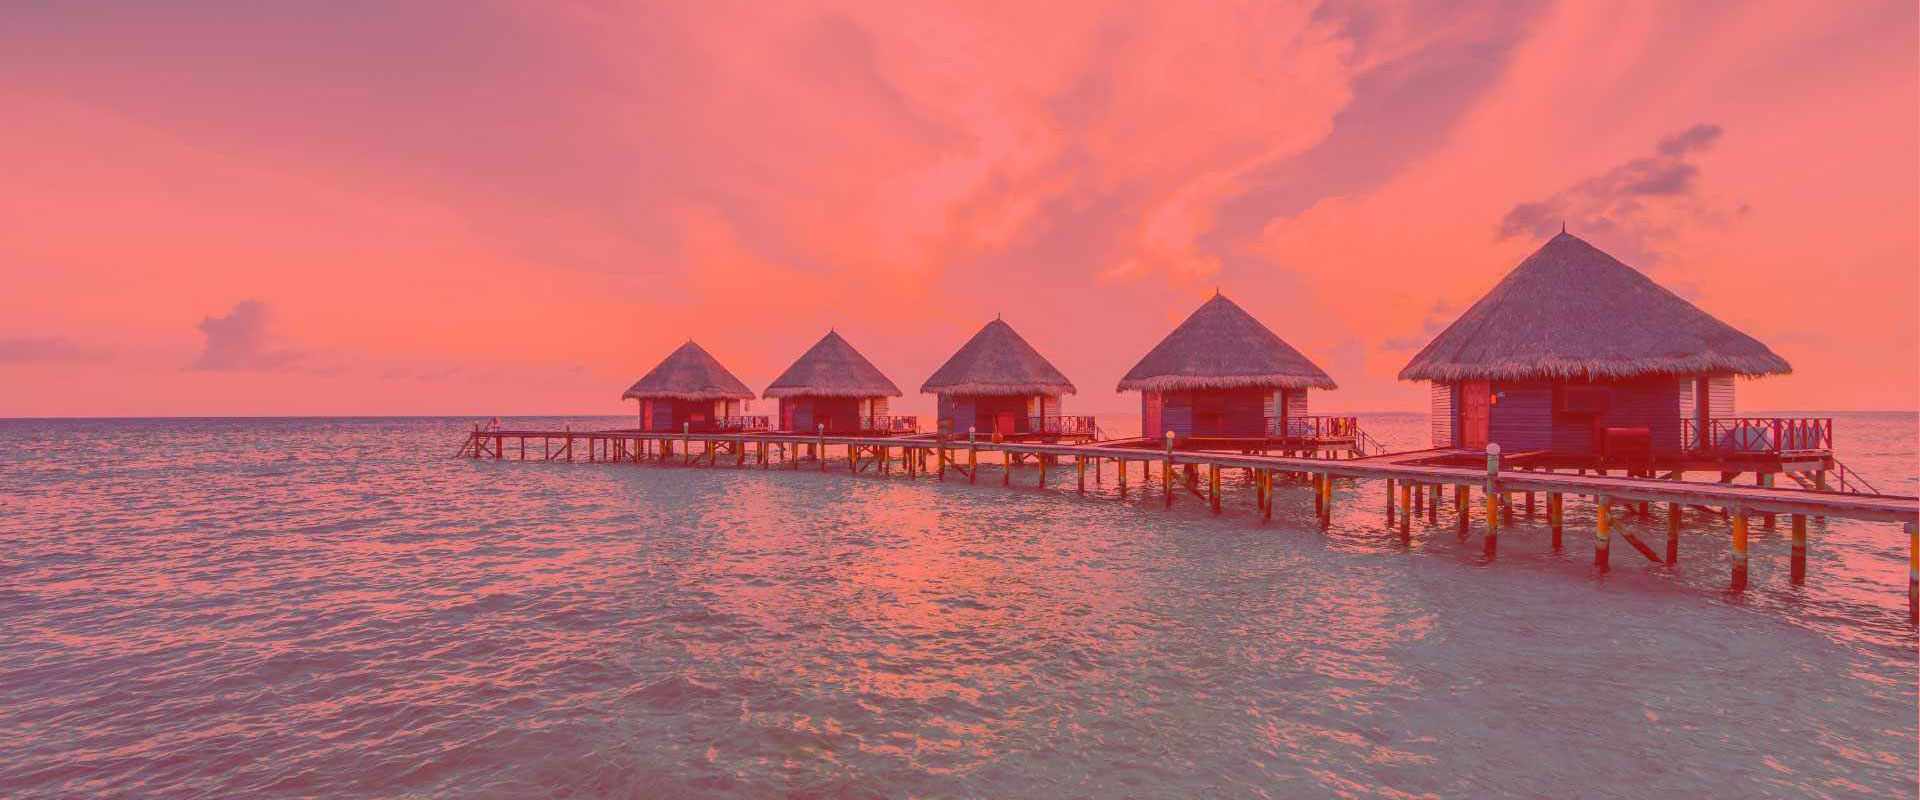 Over-Water-Bungalows--red